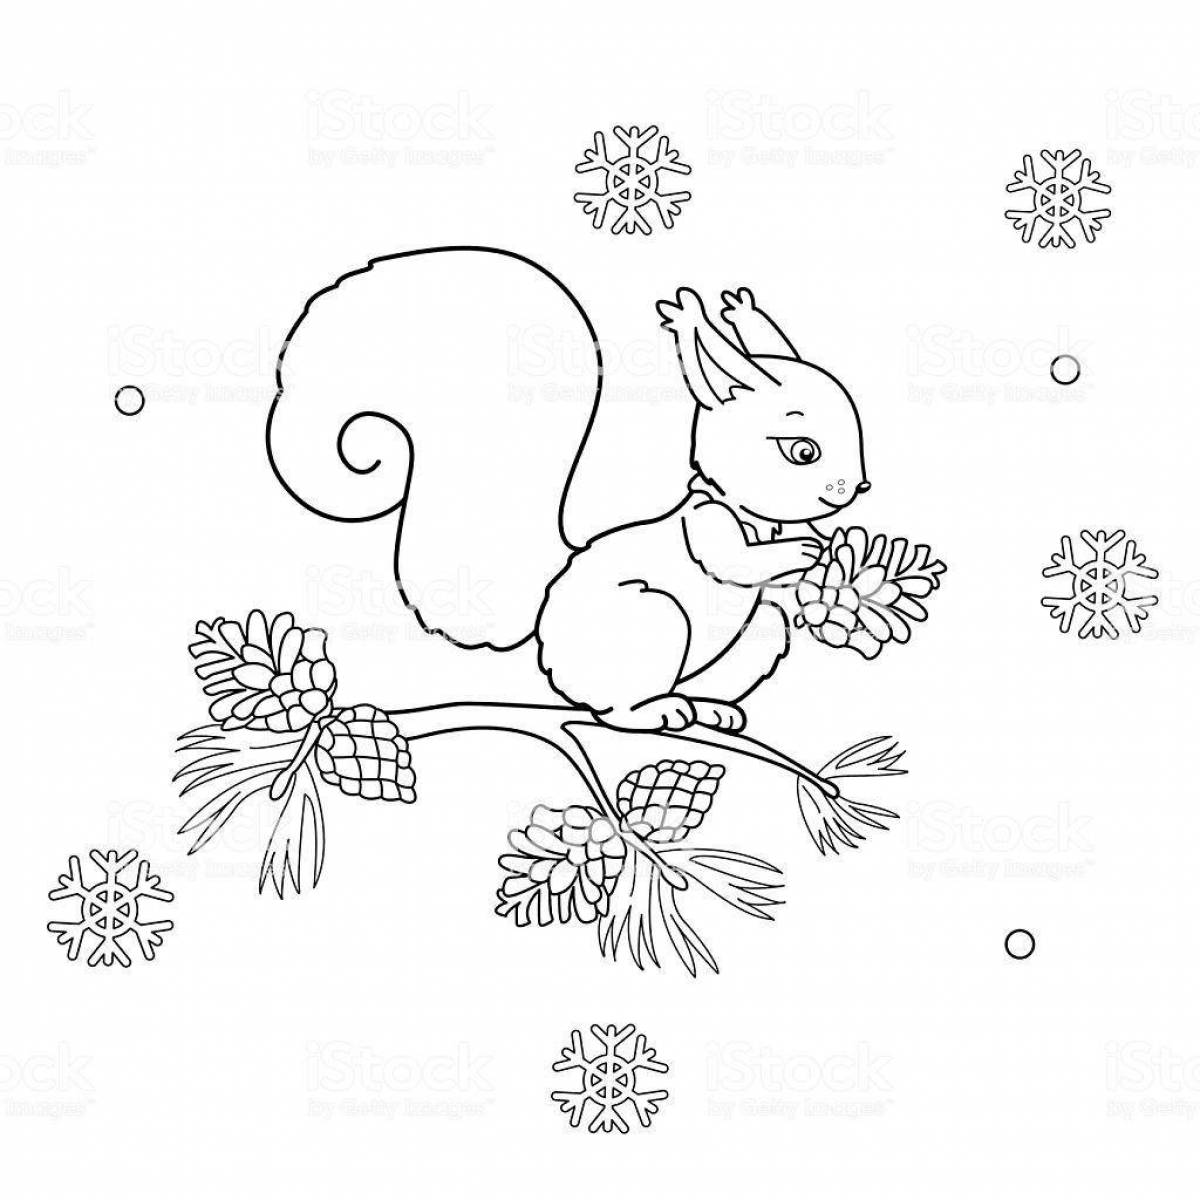 Nimble squirrel in the forest